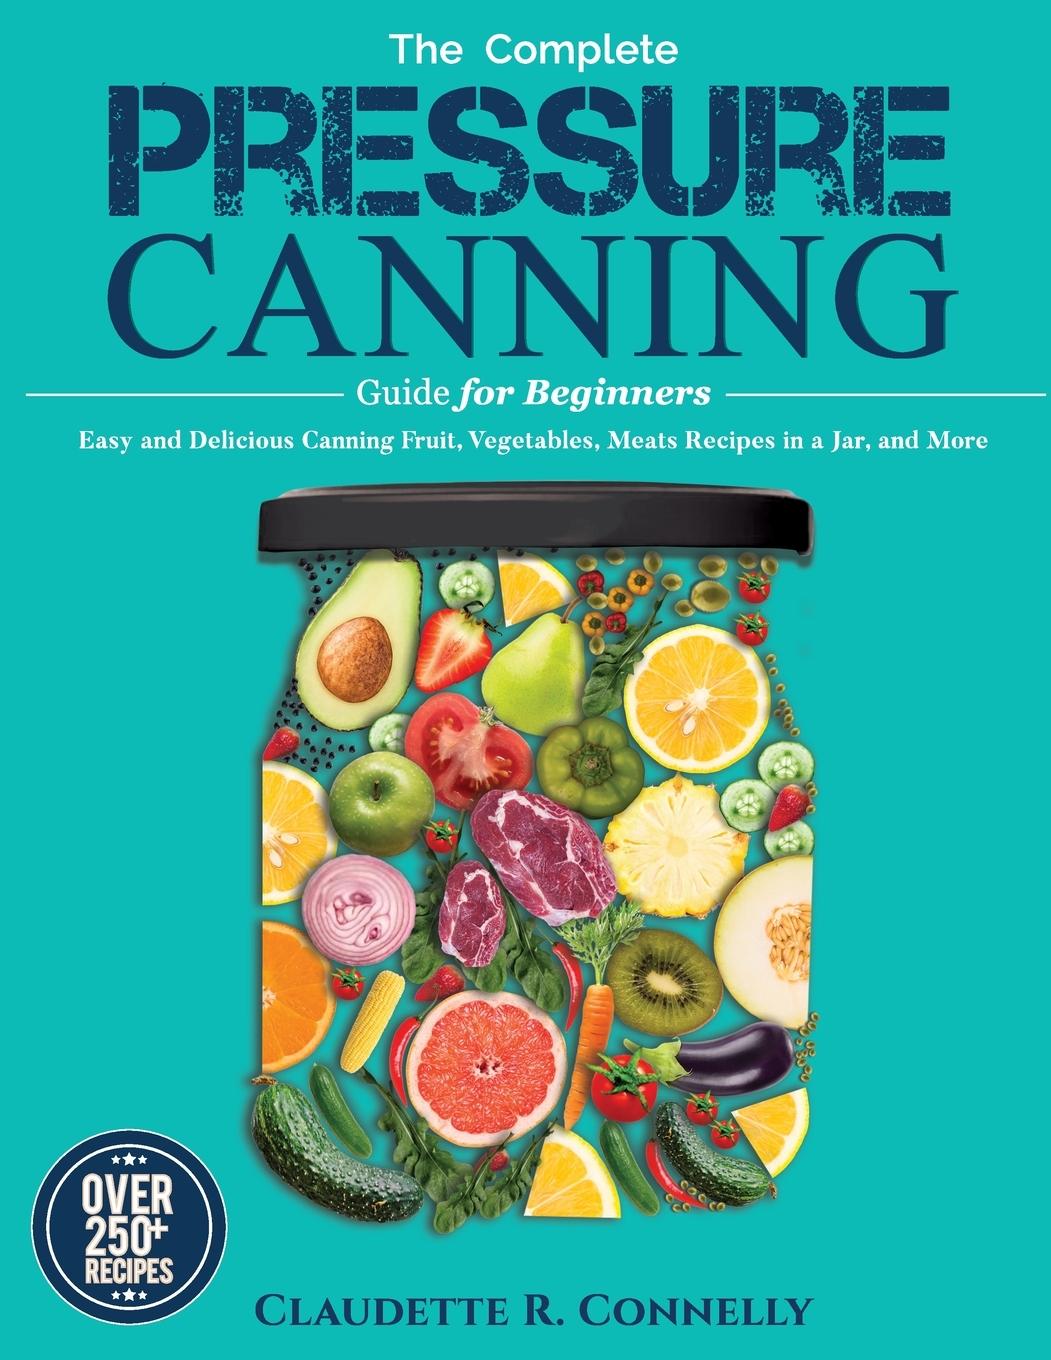 Book Complete Pressure Canning Guide for Beginners 